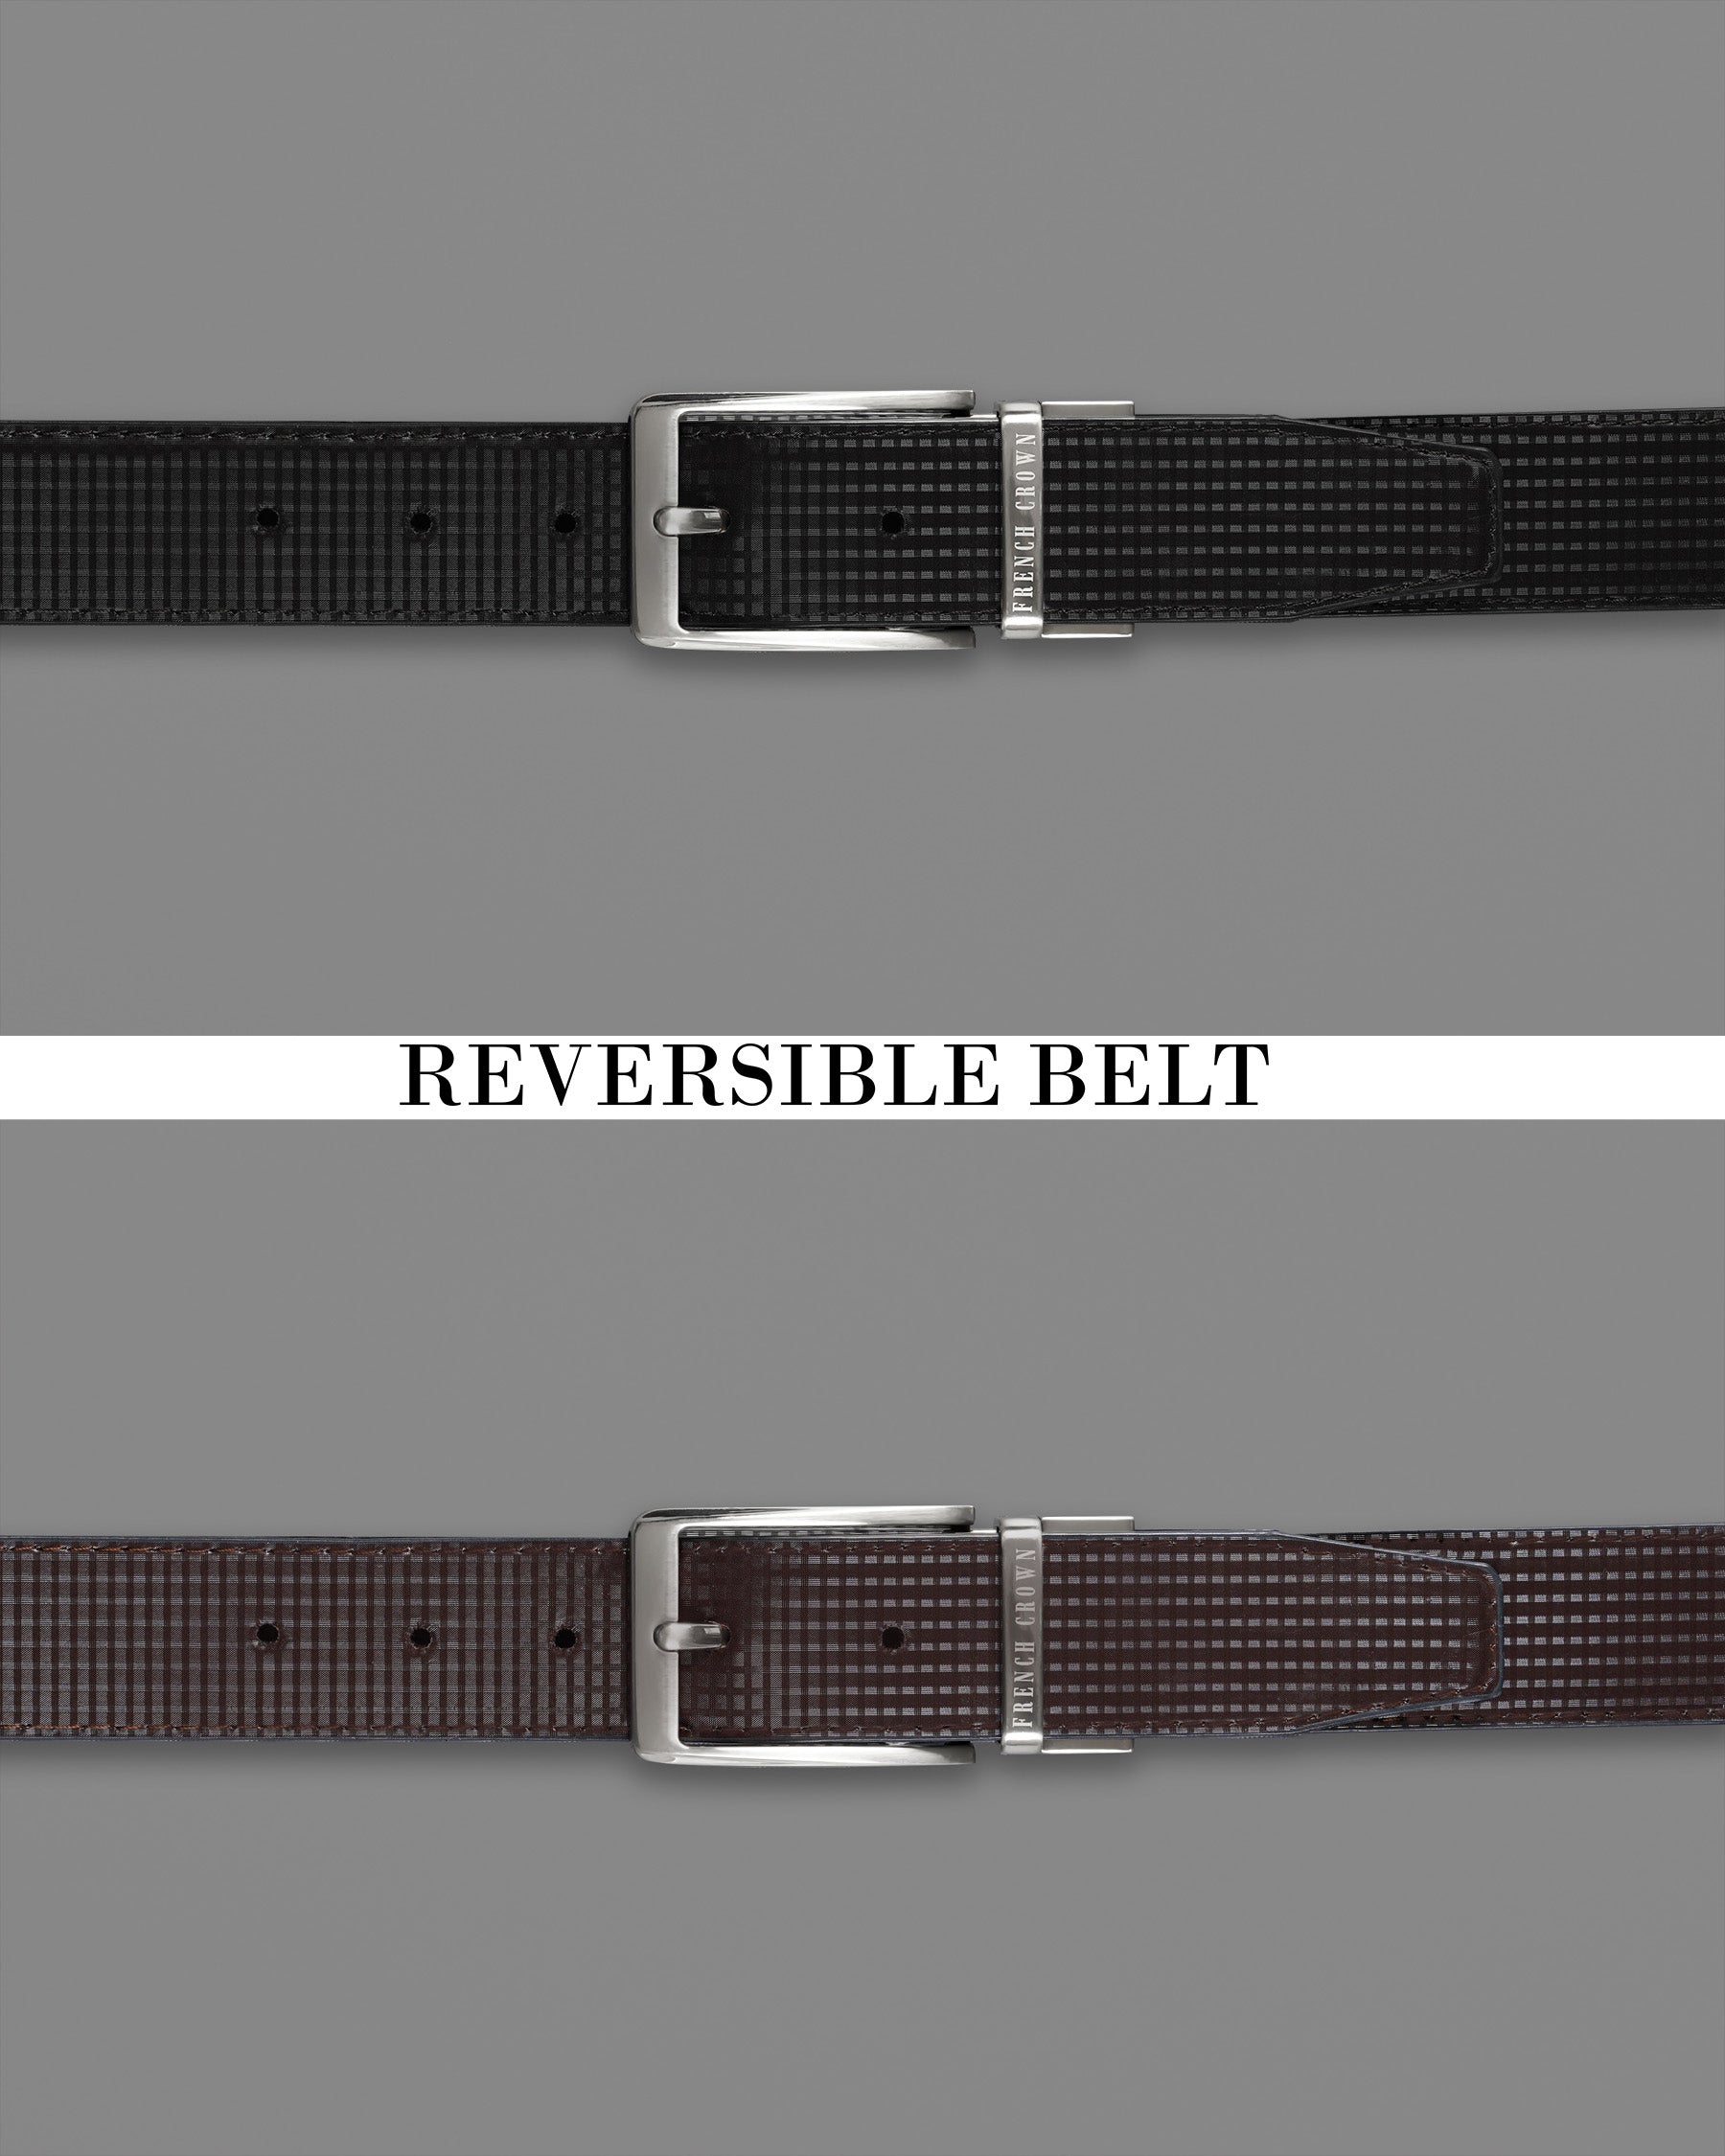 Silver Shiny Buckle with Jade Black and Brown Leather Free Handcrafted Reversible Belt BT066-28, BT066-30, BT066-32, BT066-34, BT066-36, BT066-38